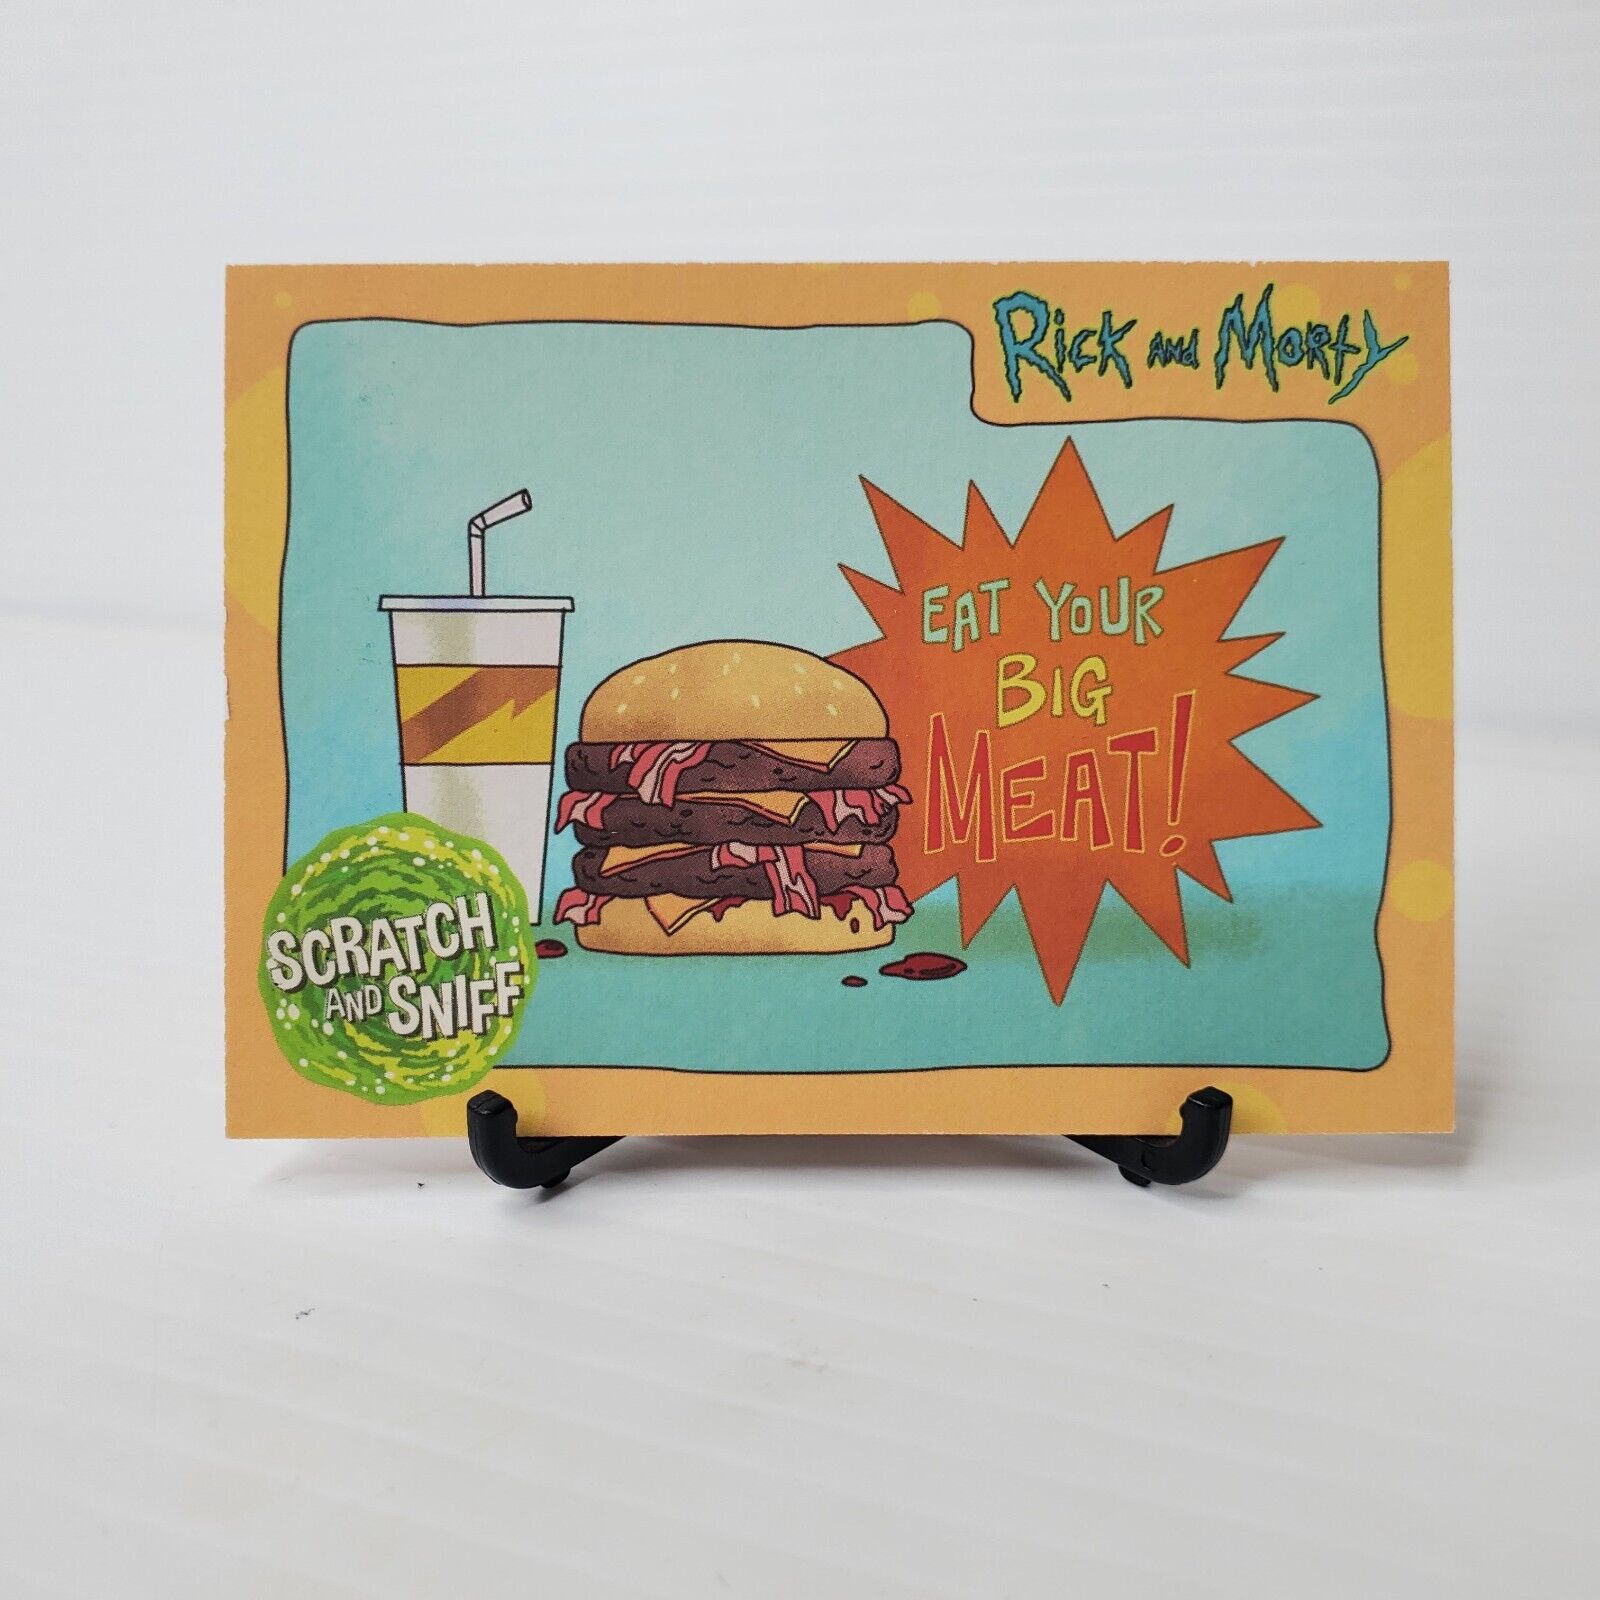 2018 Rick & Morty Season 1 | Scratch Sniff | Eat Your Big Meat | Chase Card SS8